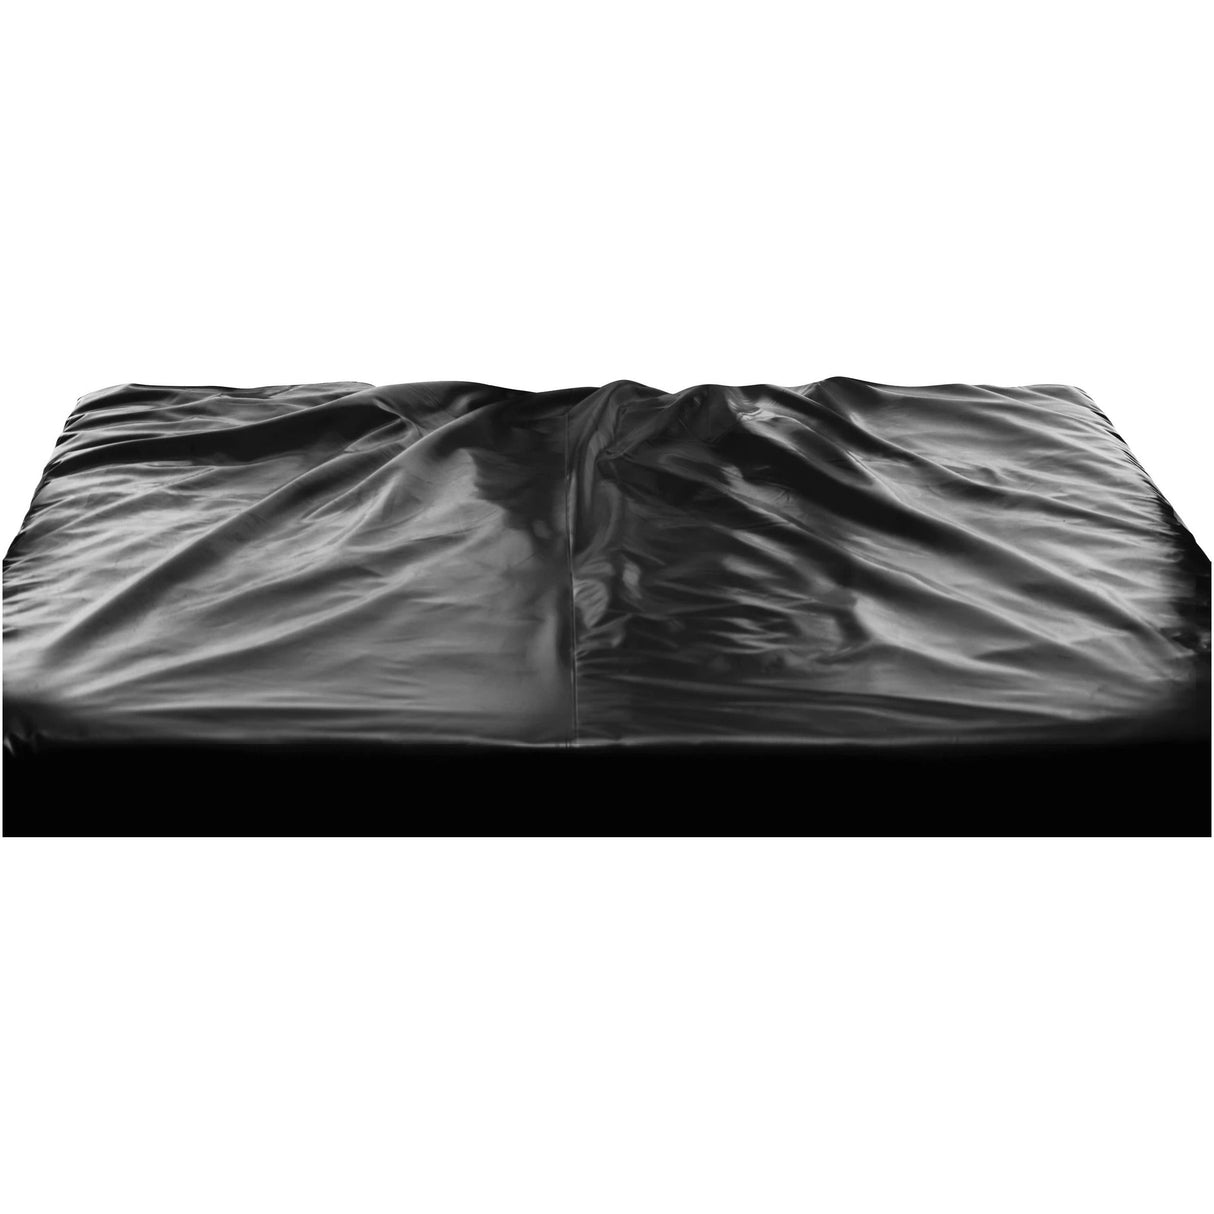 King Size Waterproof Fitted Bed Sheet